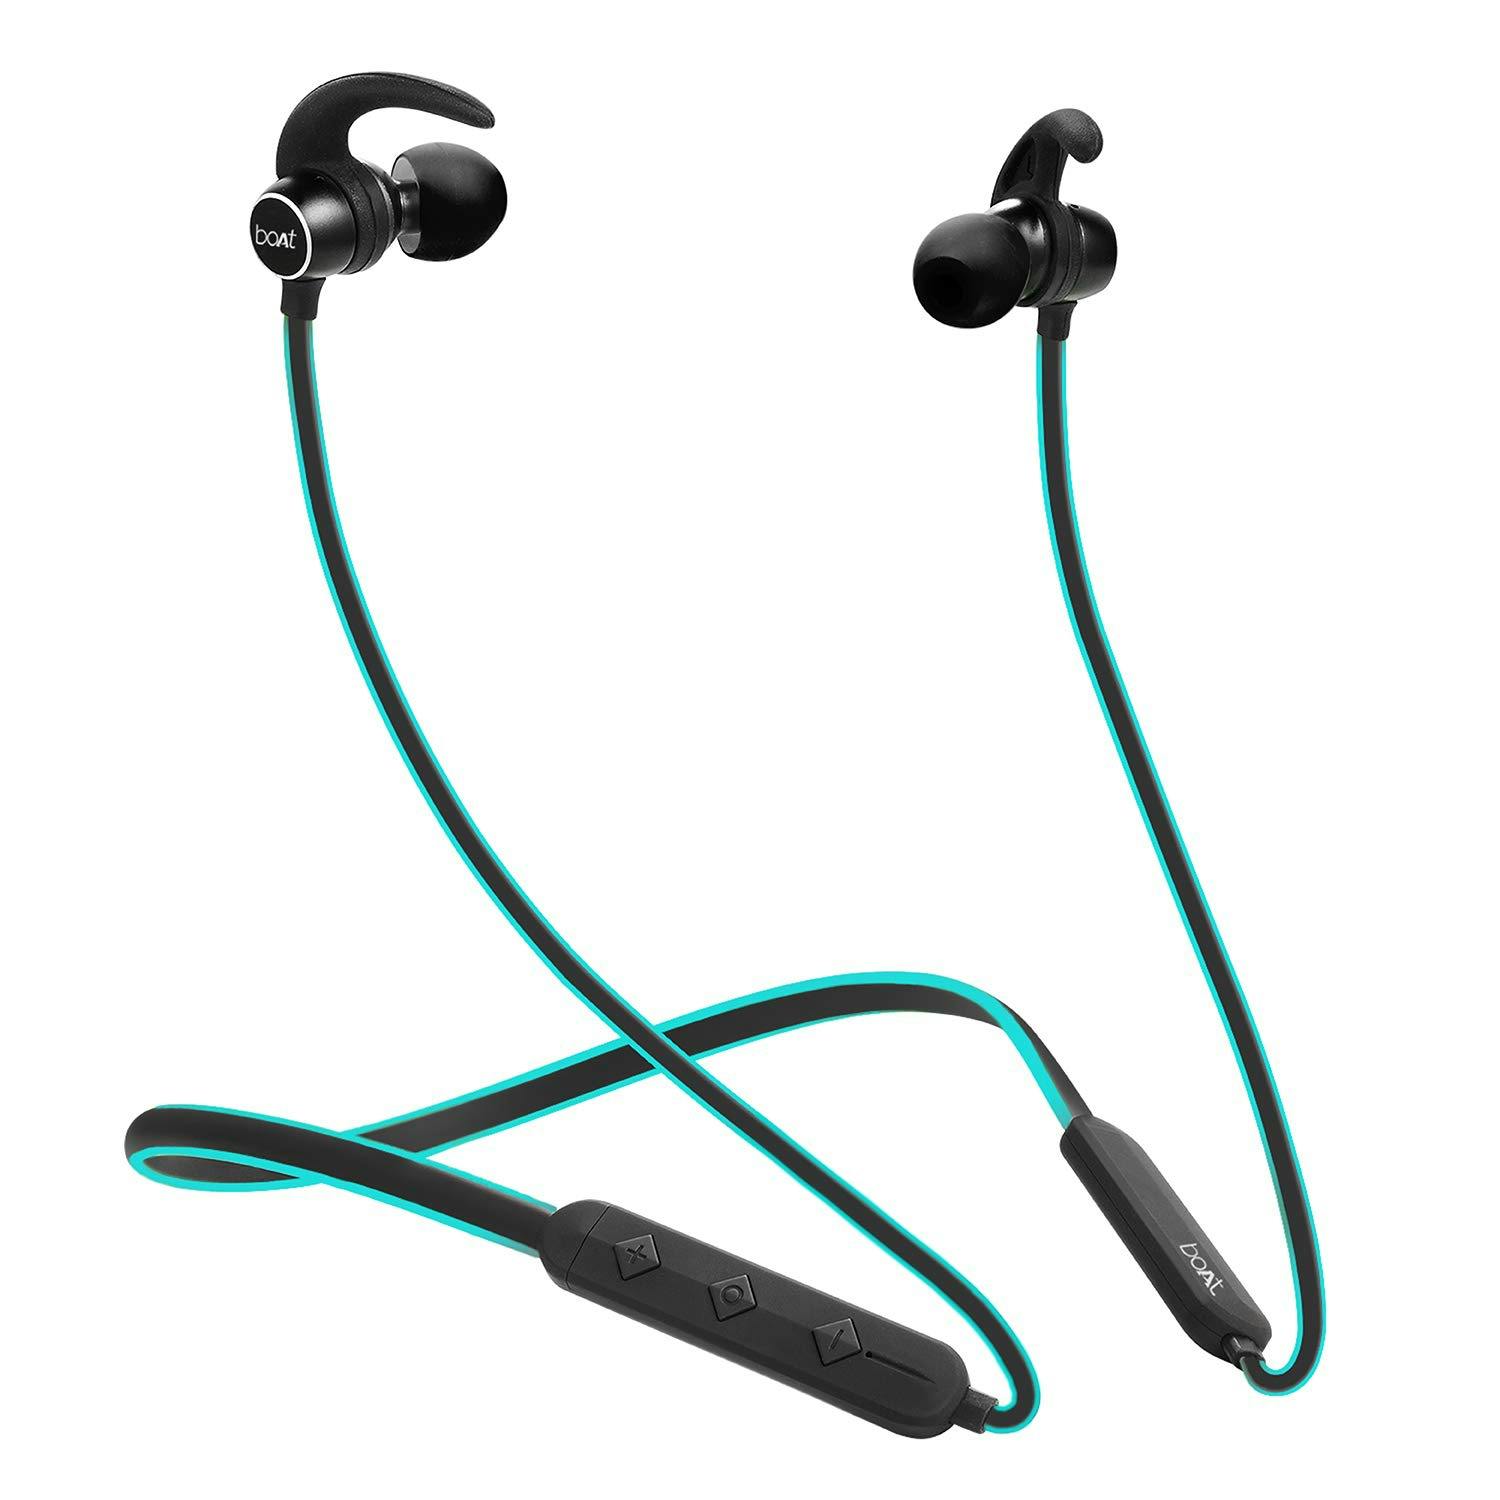 boAt Ear Bluetooth Neckband Earphone with Mic at Rs 899 only